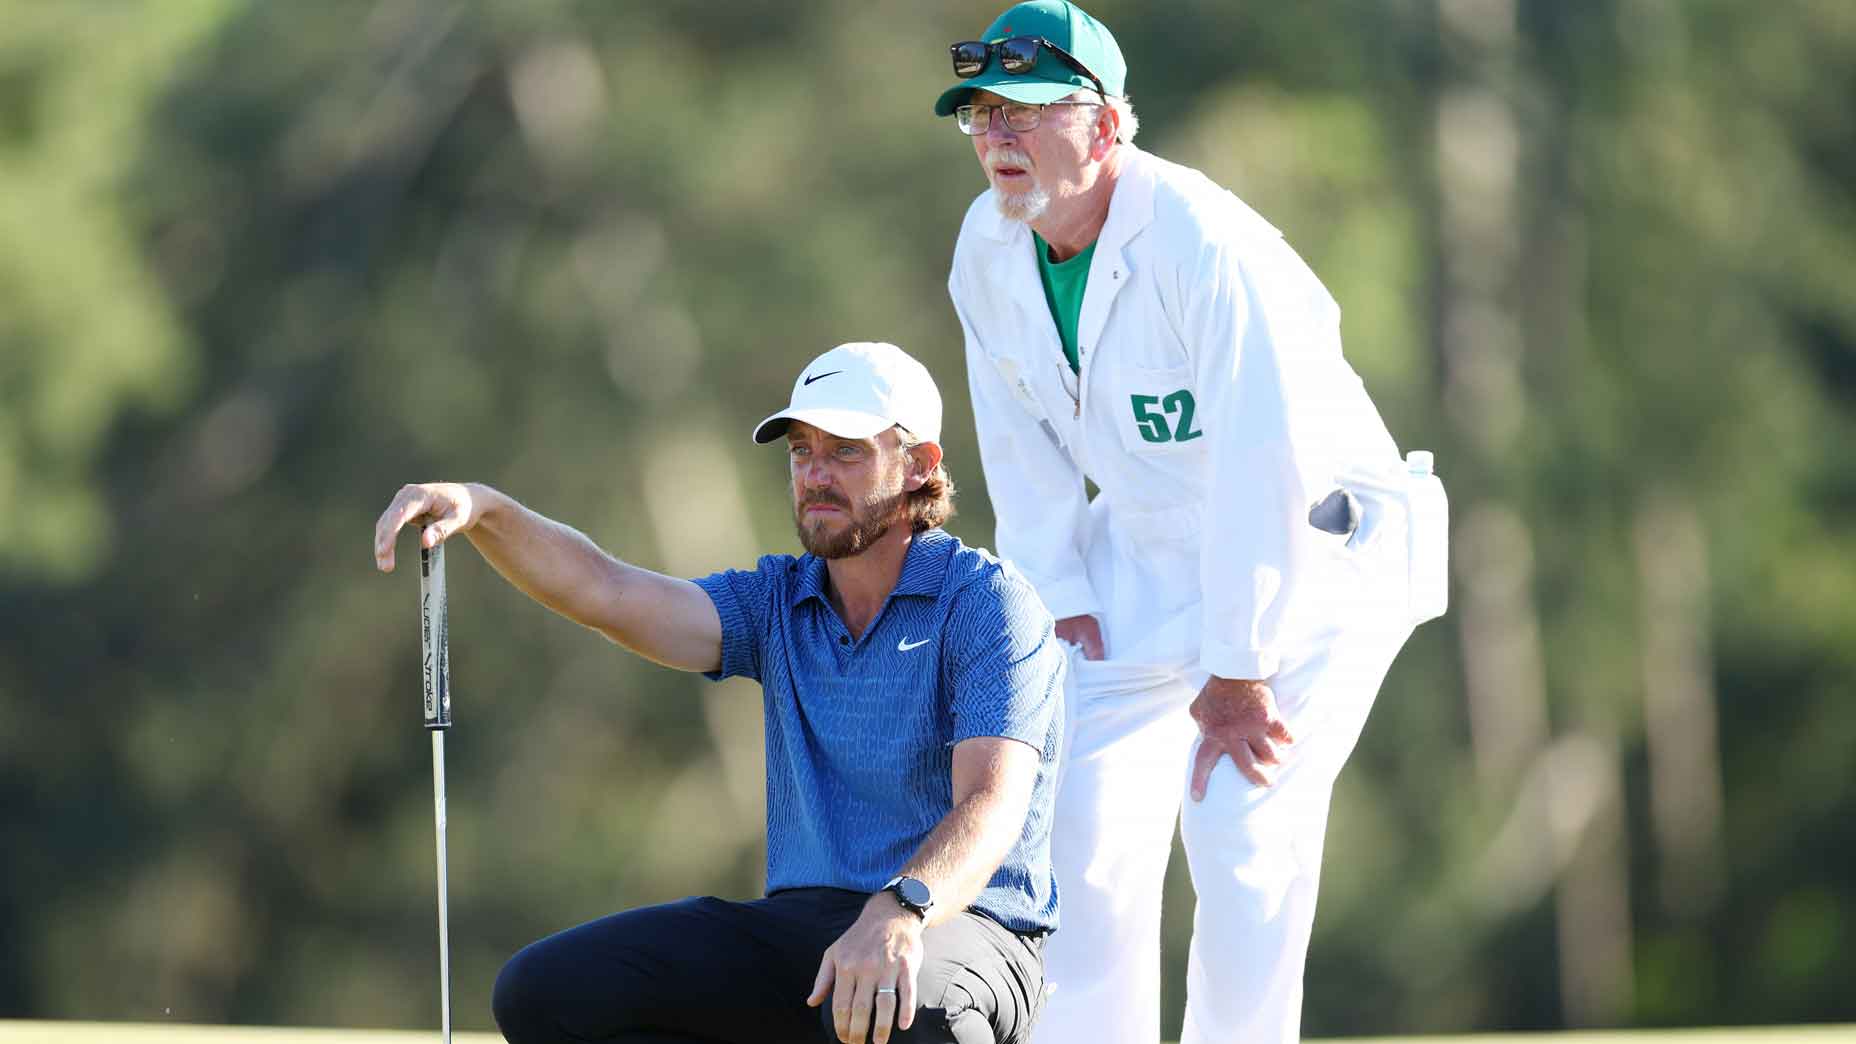 After Tommy Fleetwood's normal caddie got sick, he used a local looper for the Masters - and the results led to an insane payday